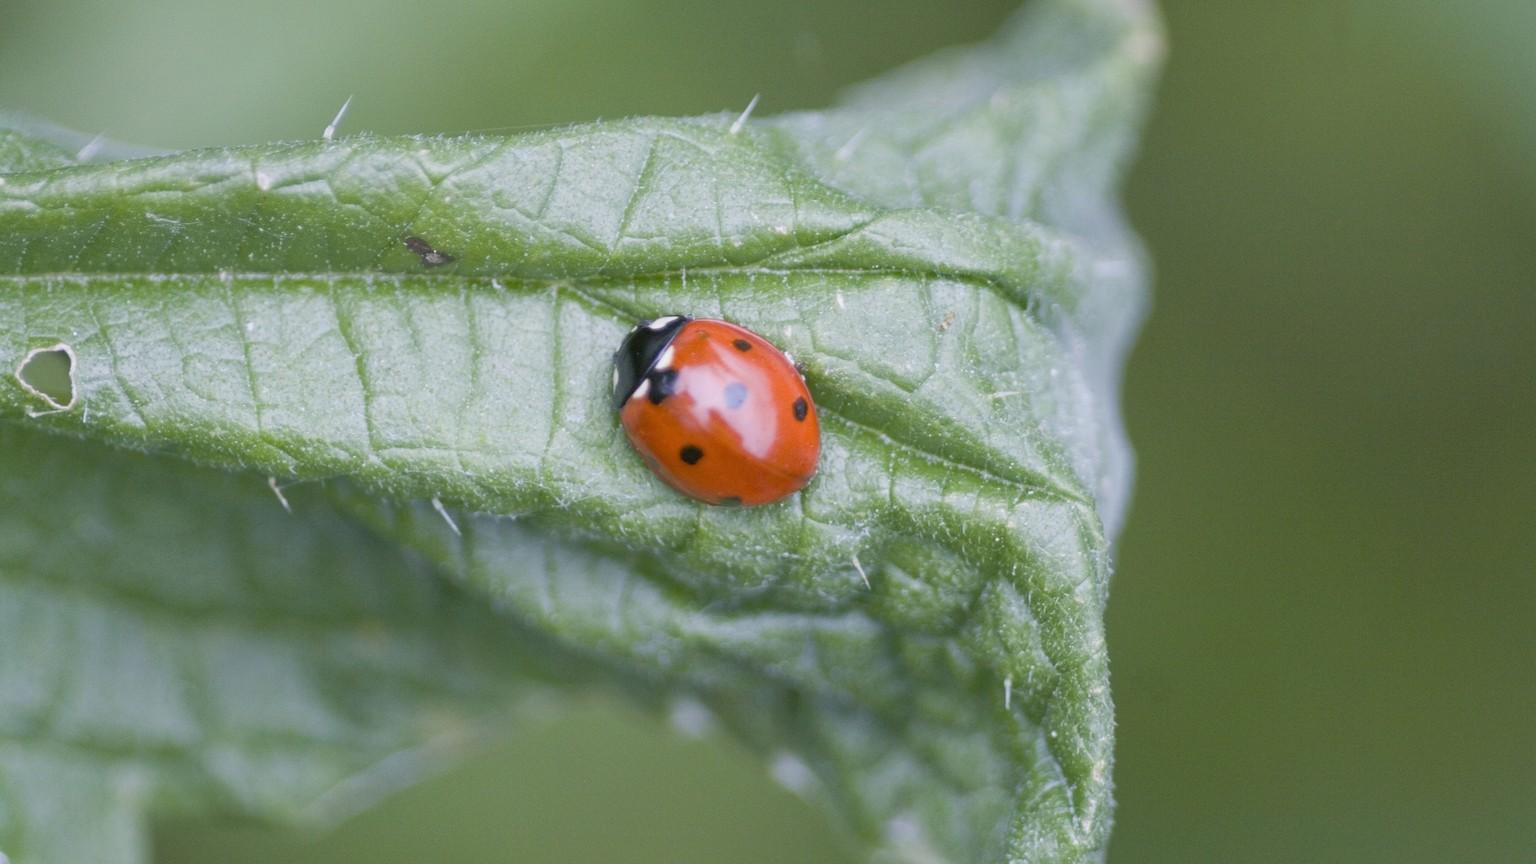 red seven-spotted ladybird beetle on a leaf